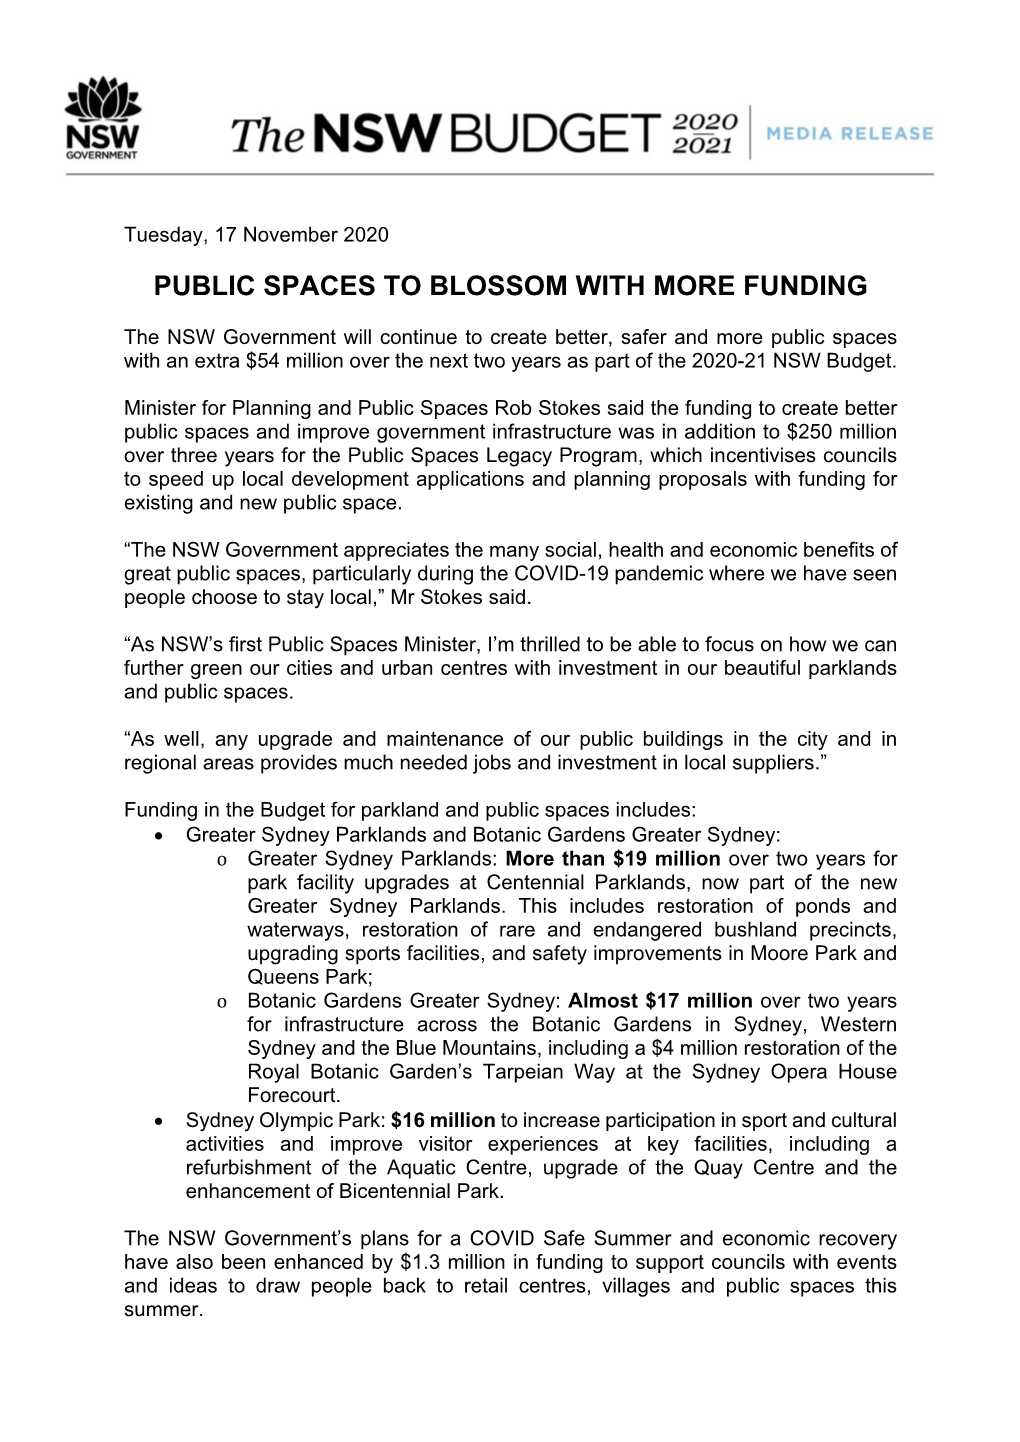 Public Spaces to Blossom with More Funding